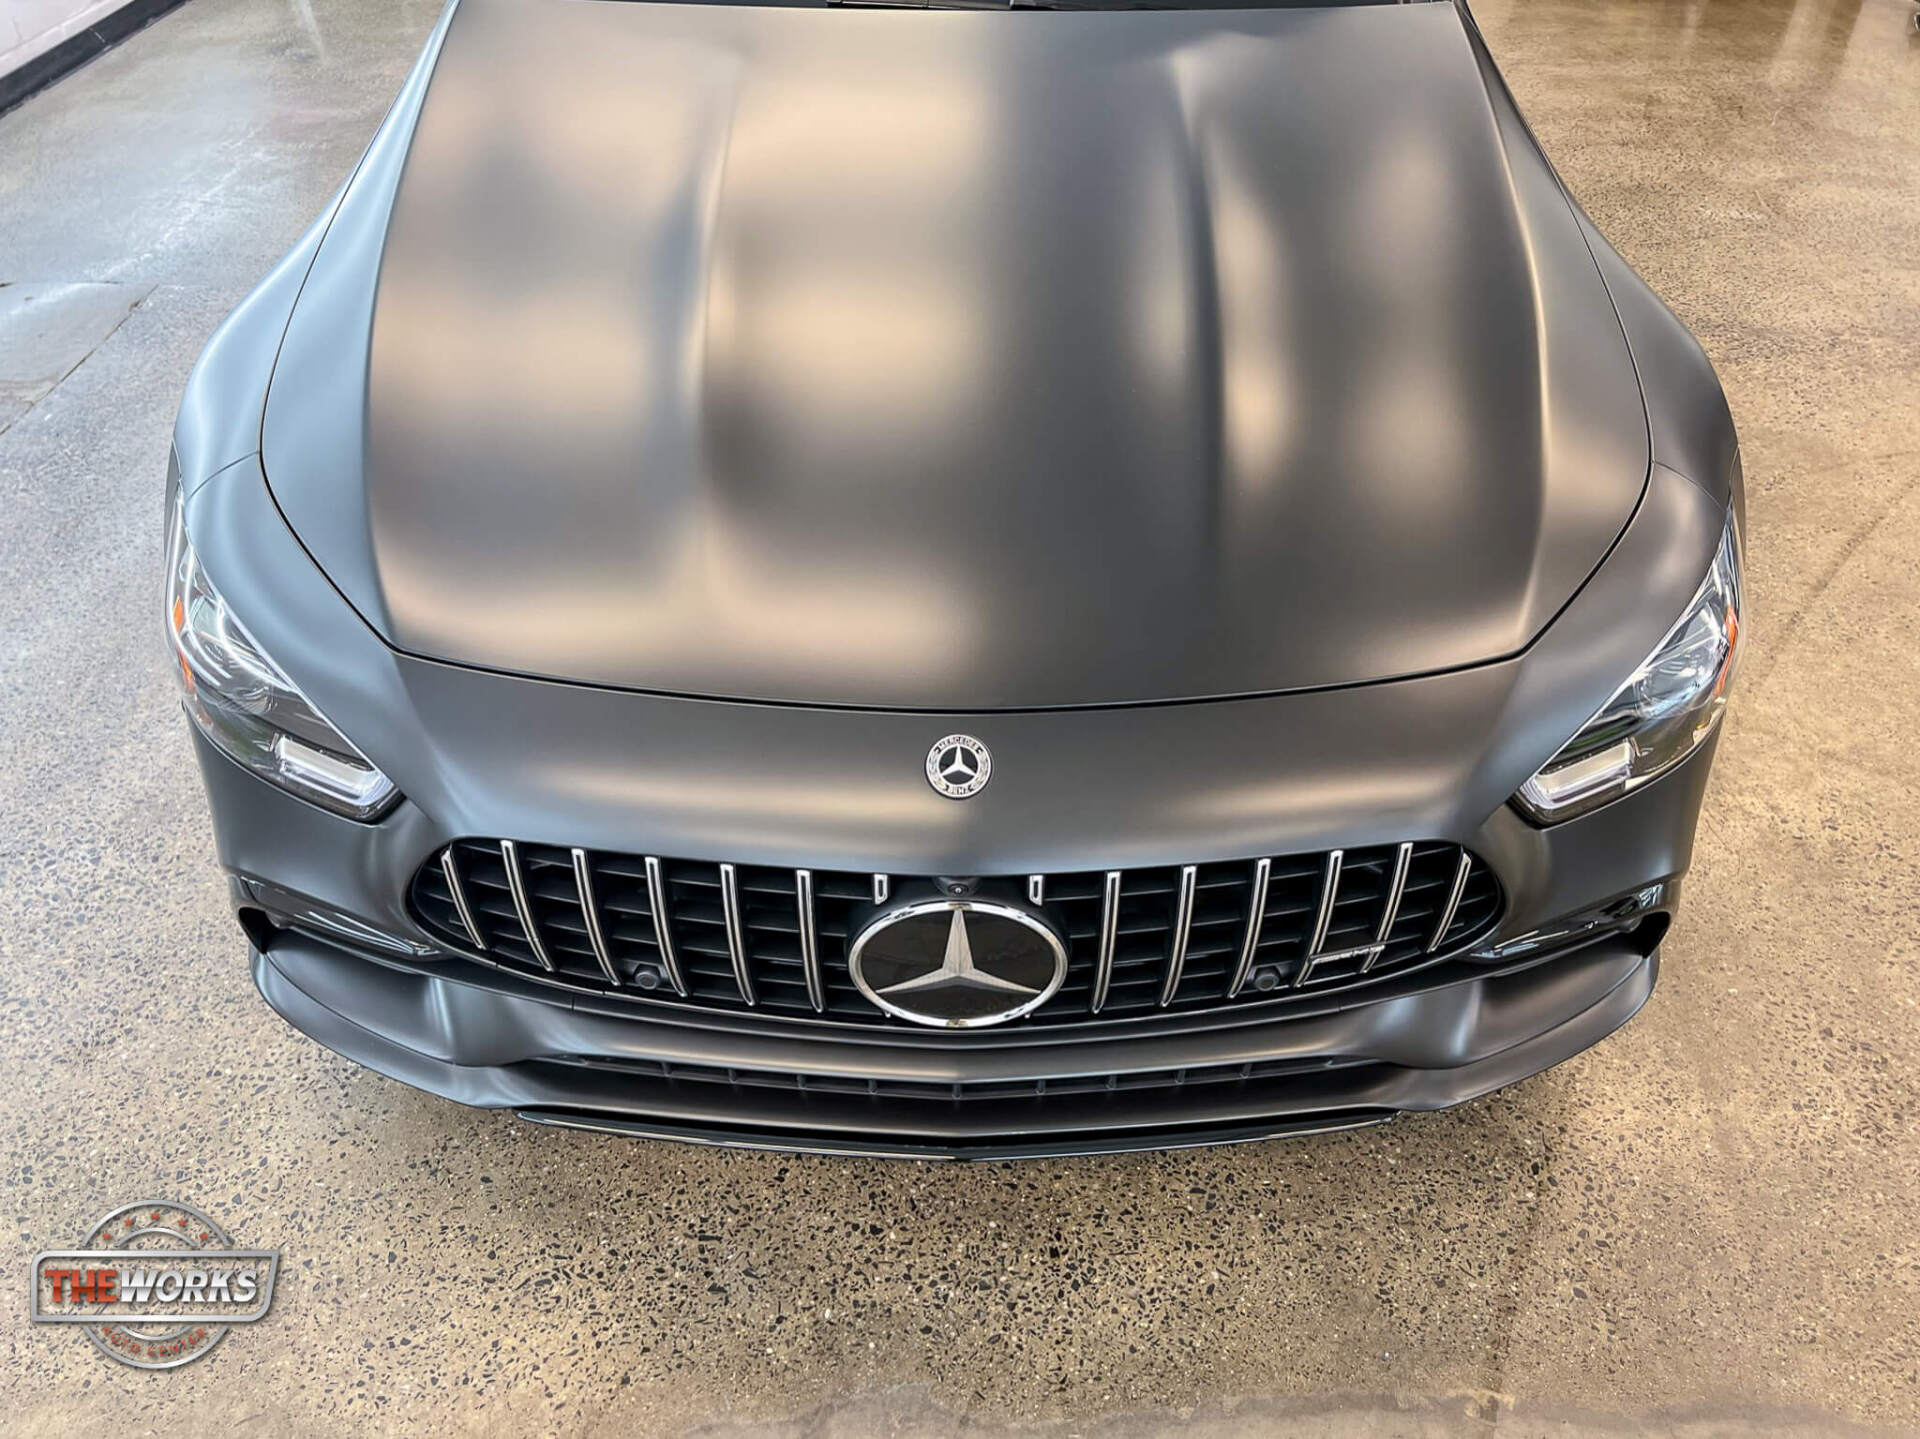 The front of a mercedes benz amg gt 63 s is shown in a showroom.